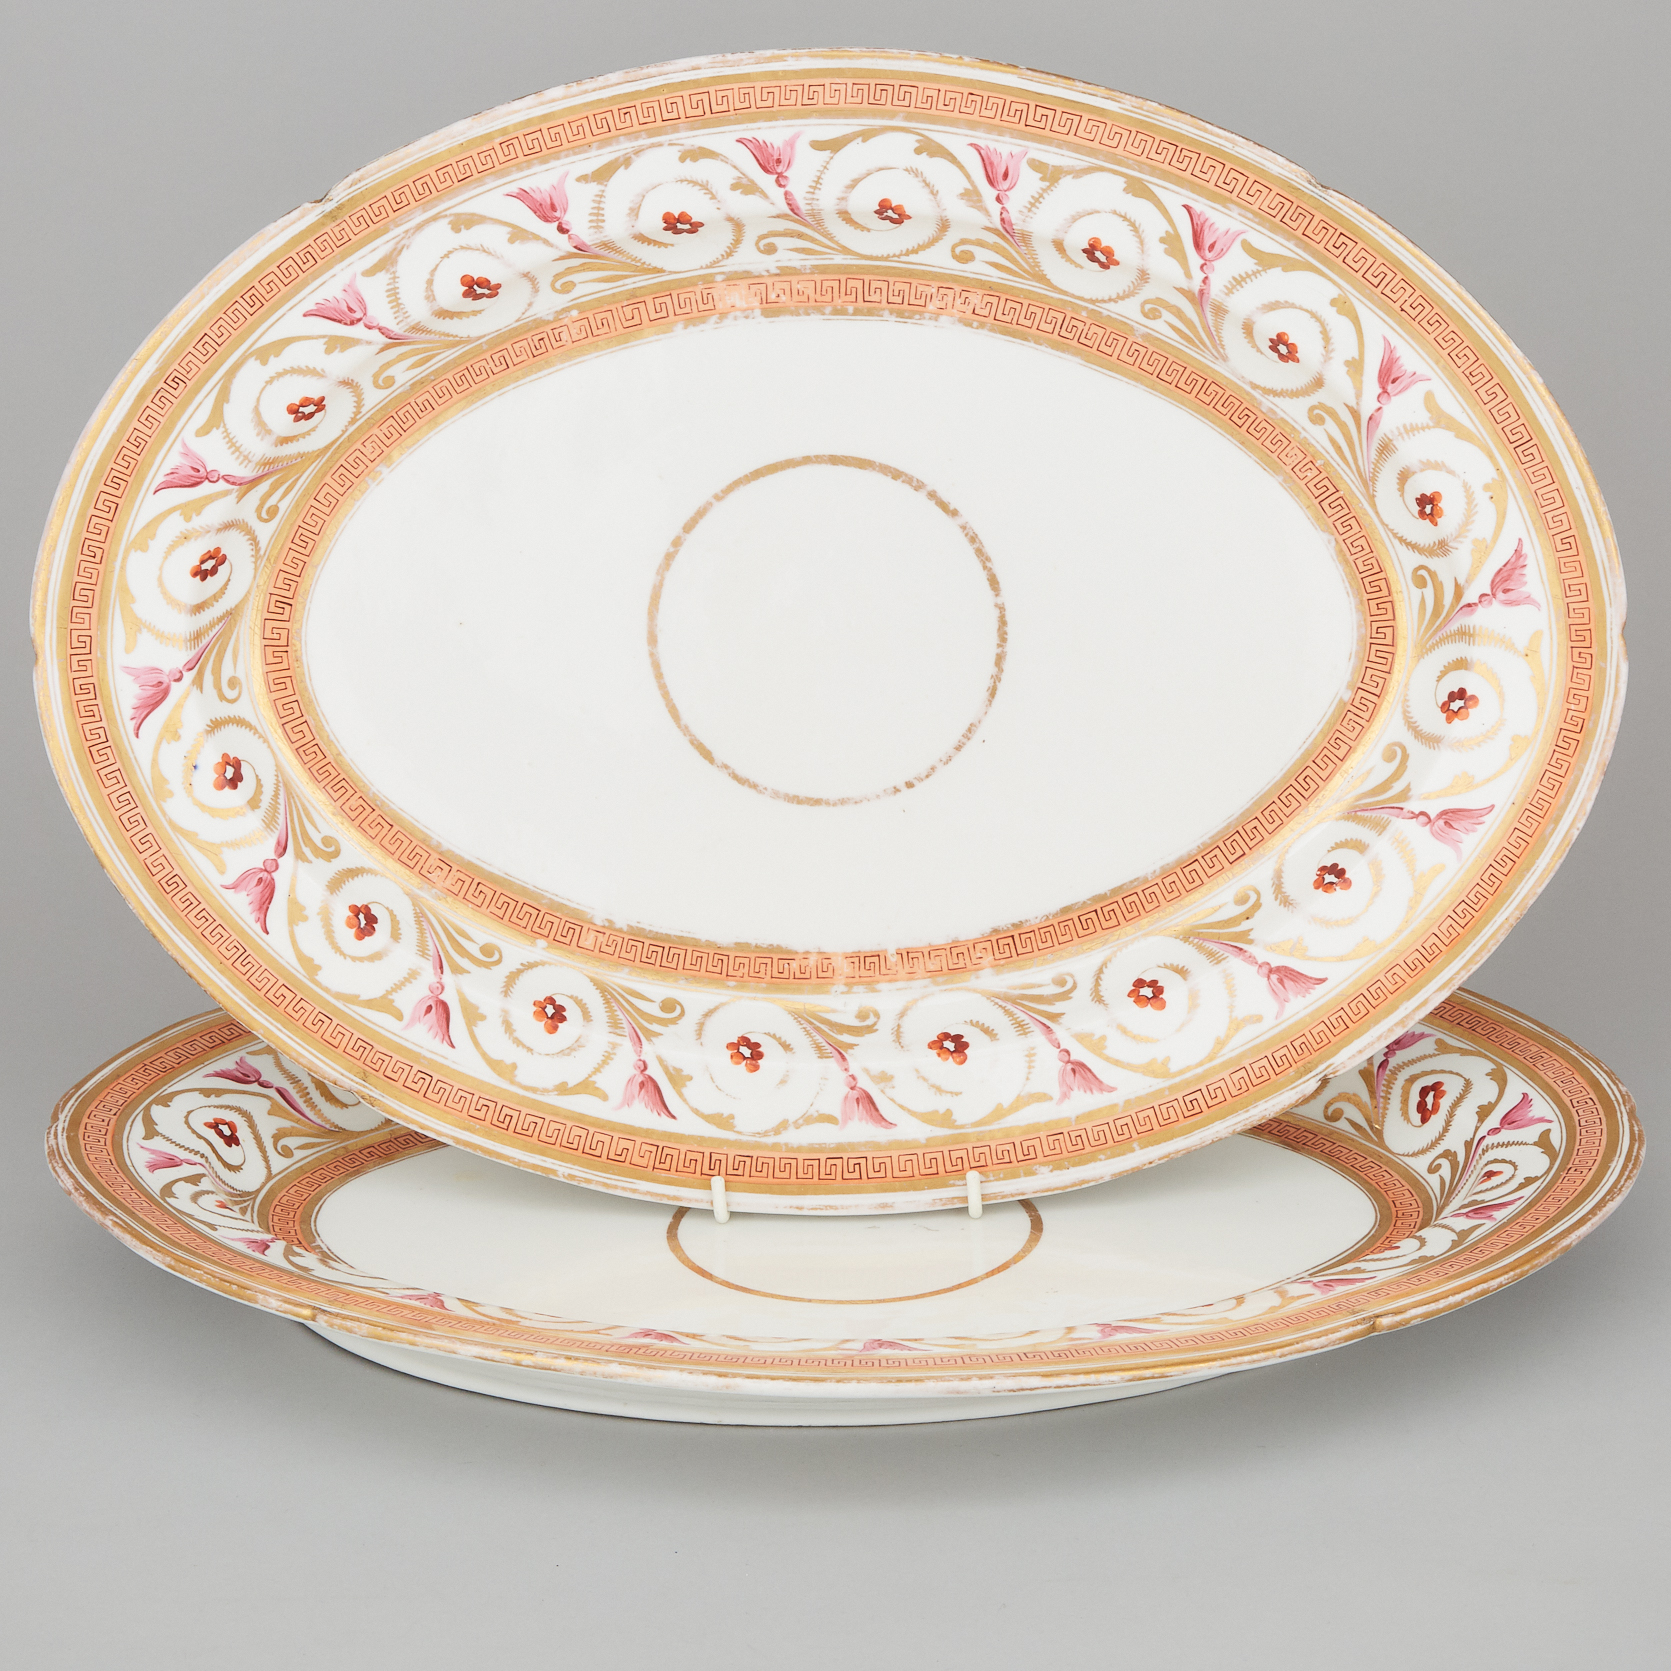 Pair of Coalport Apricot and Gilt Banded Large Oval Platters, early 19th century